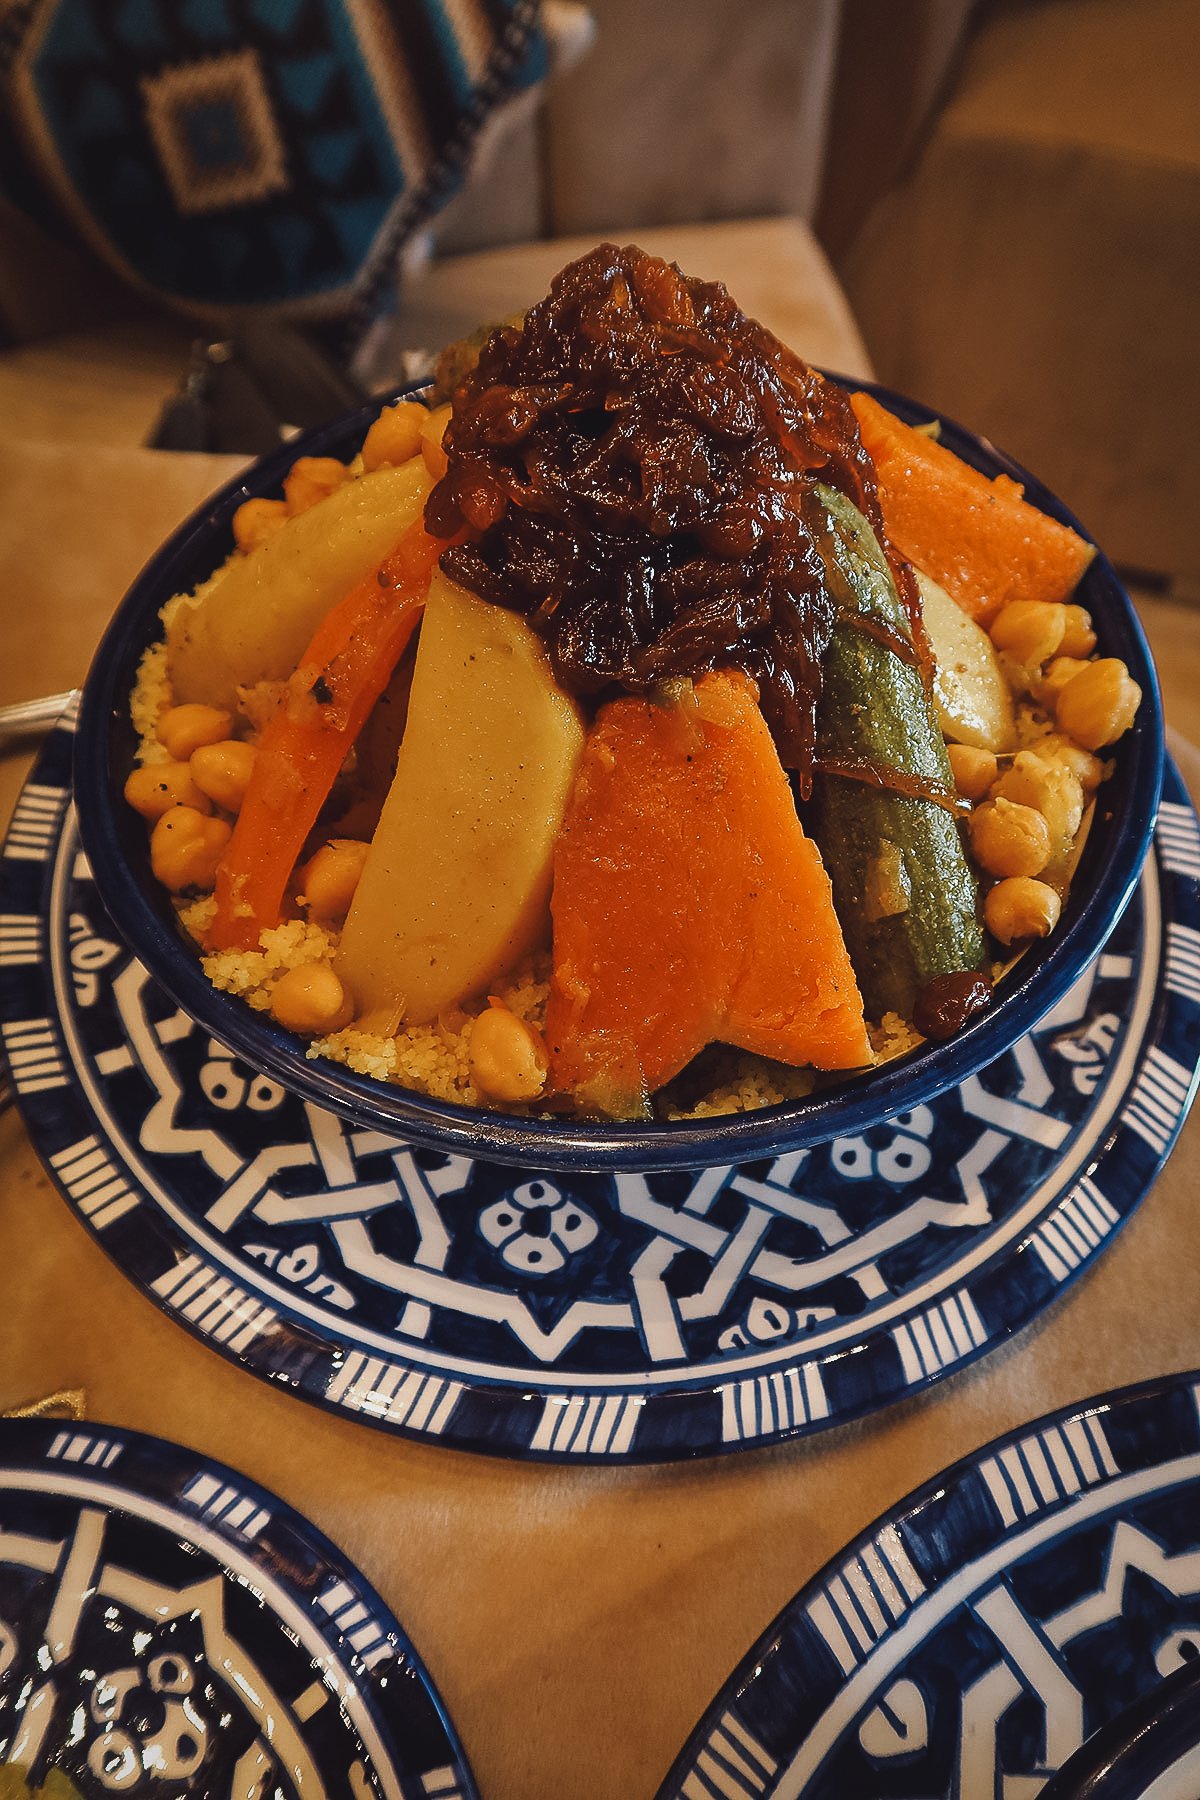 Couscous at a restaurant in Fez